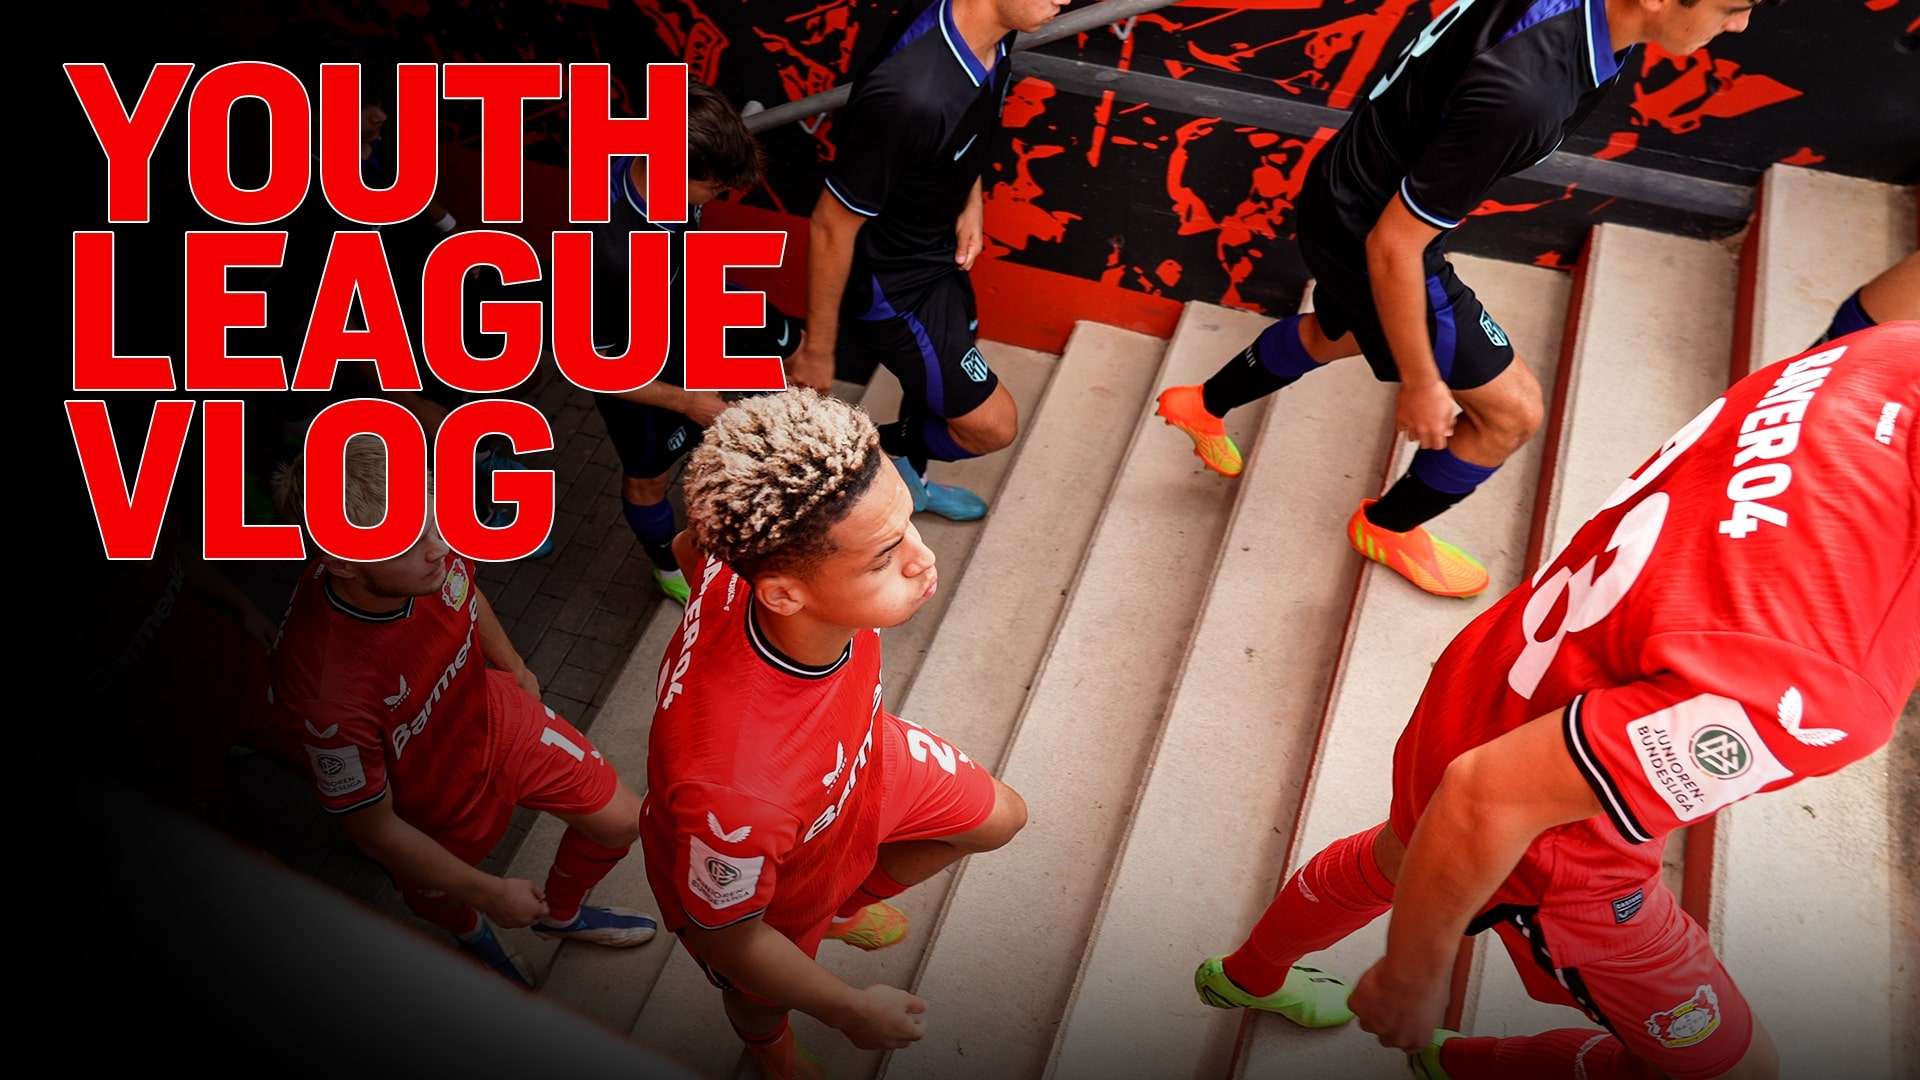 Youth League Vlog